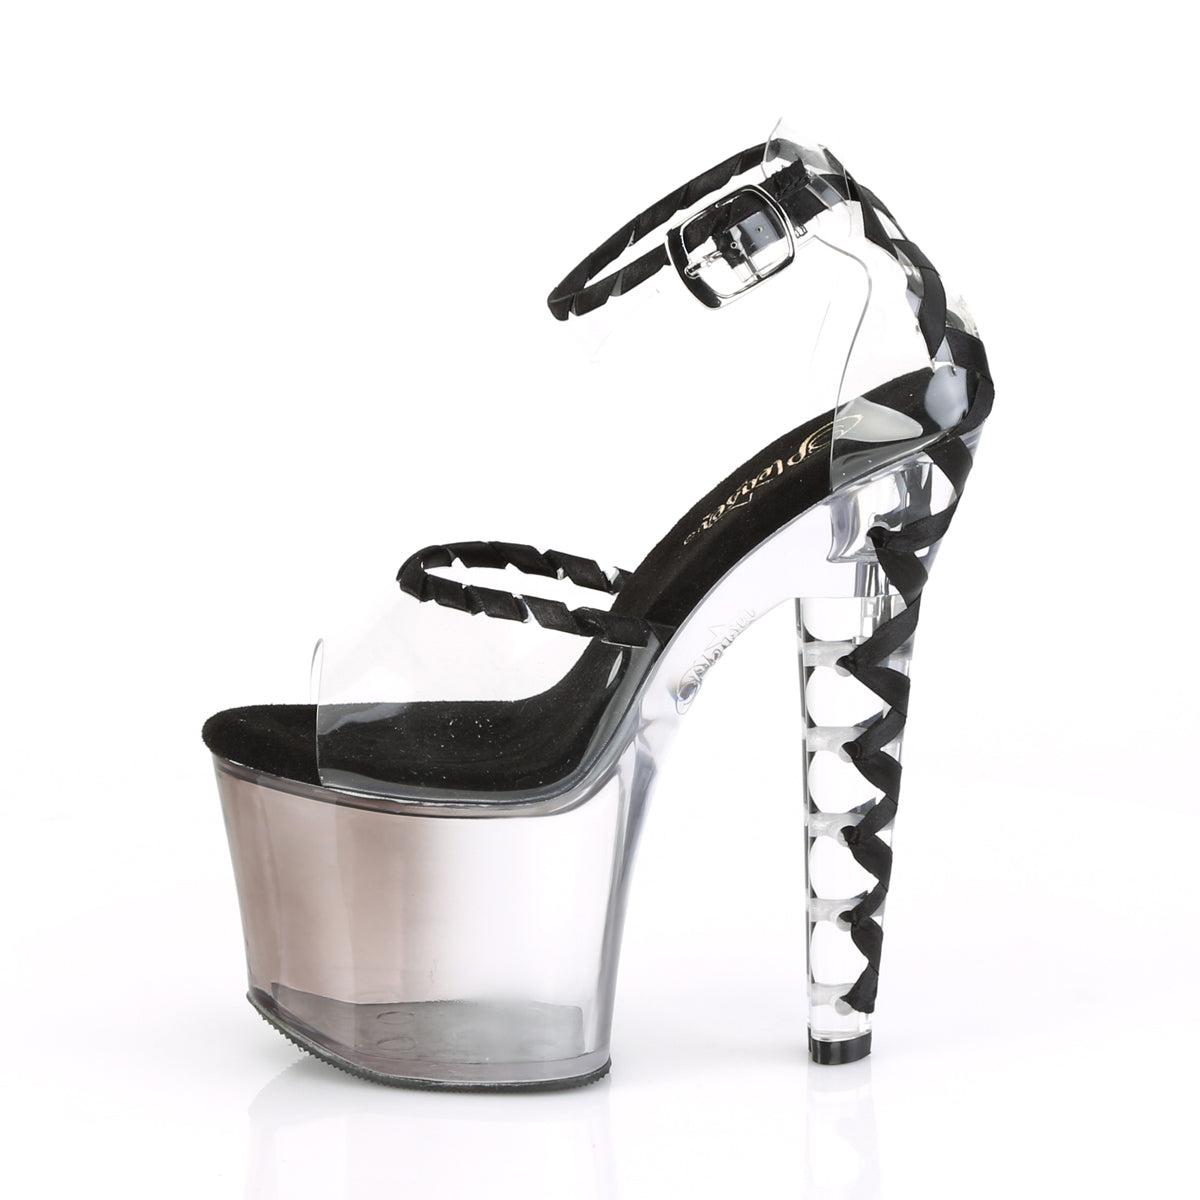 LOVESICK-712T 7" Heel Clear and Black Pole Dancing Platforms-Pleaser- Sexy Shoes Pole Dance Heels